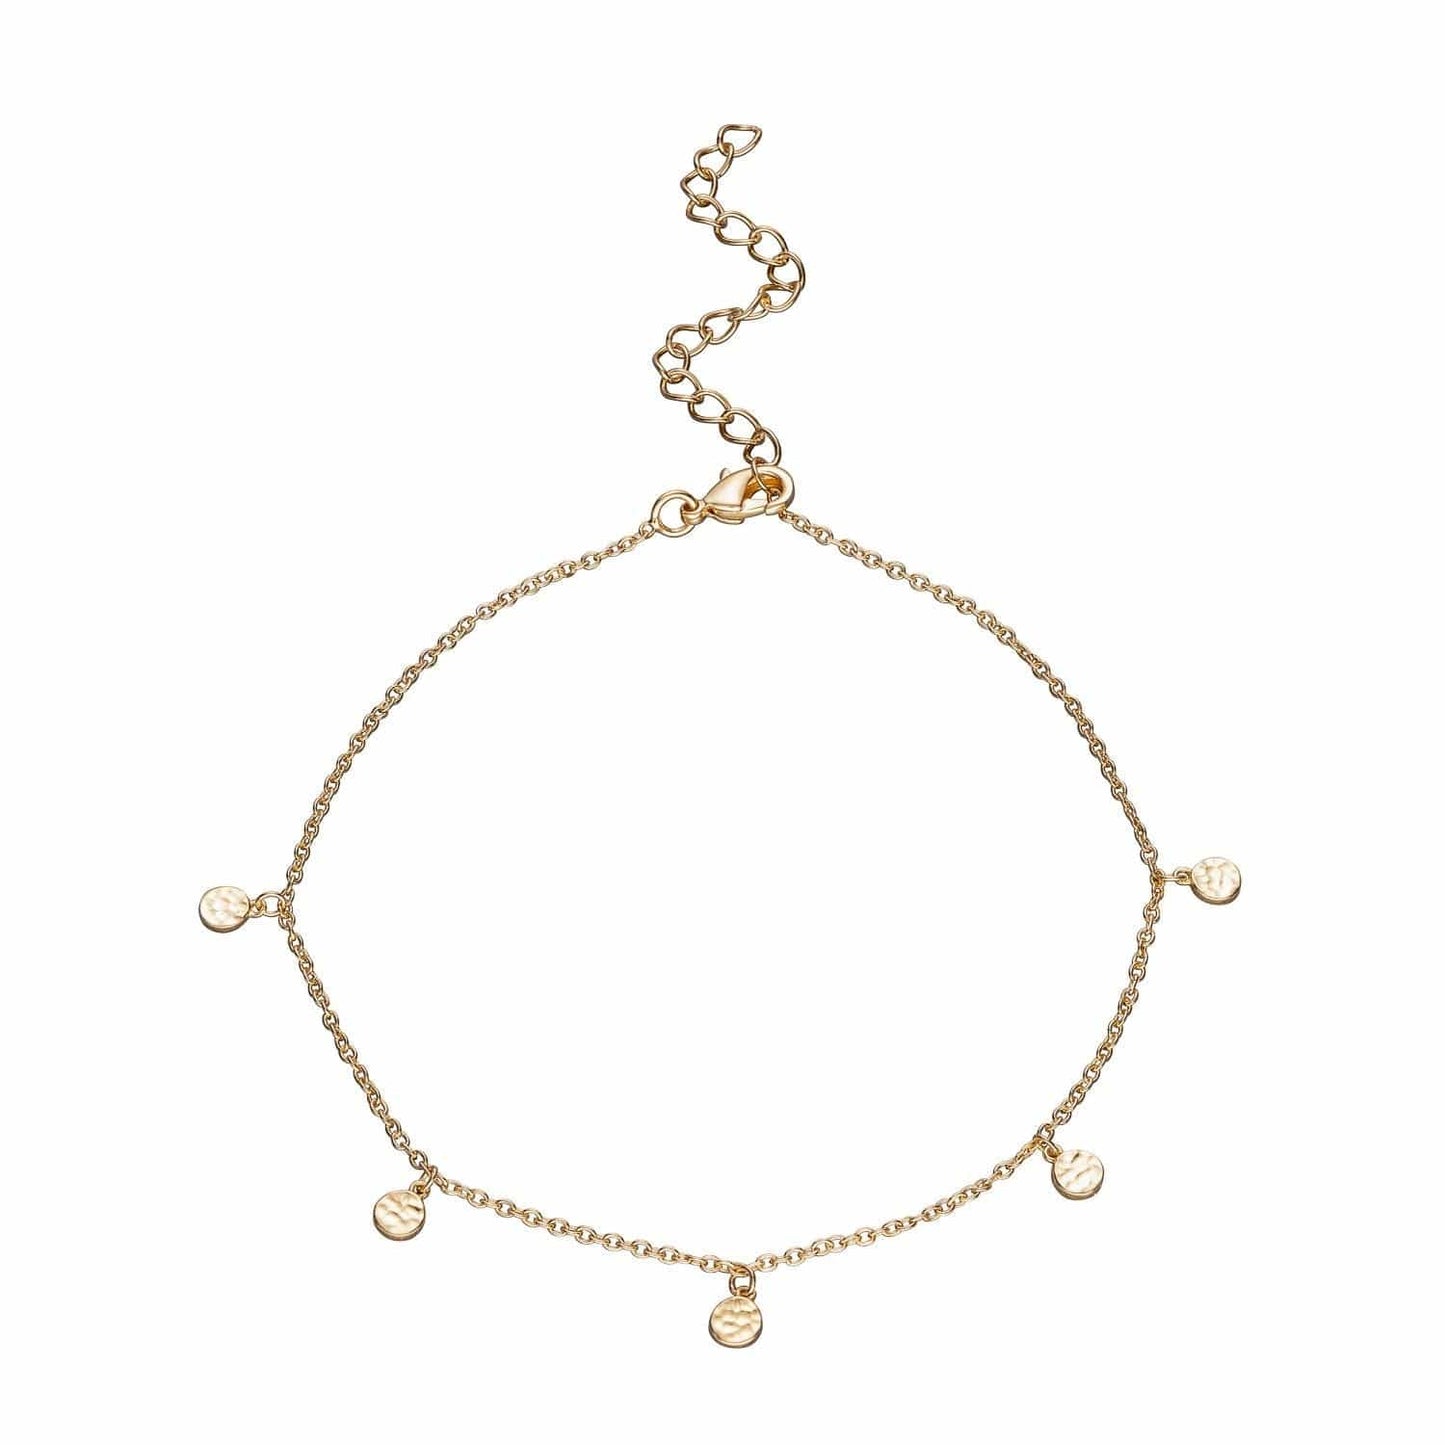 ANK-GPL Anklet with Hammered Discs - 18k Gold Plated